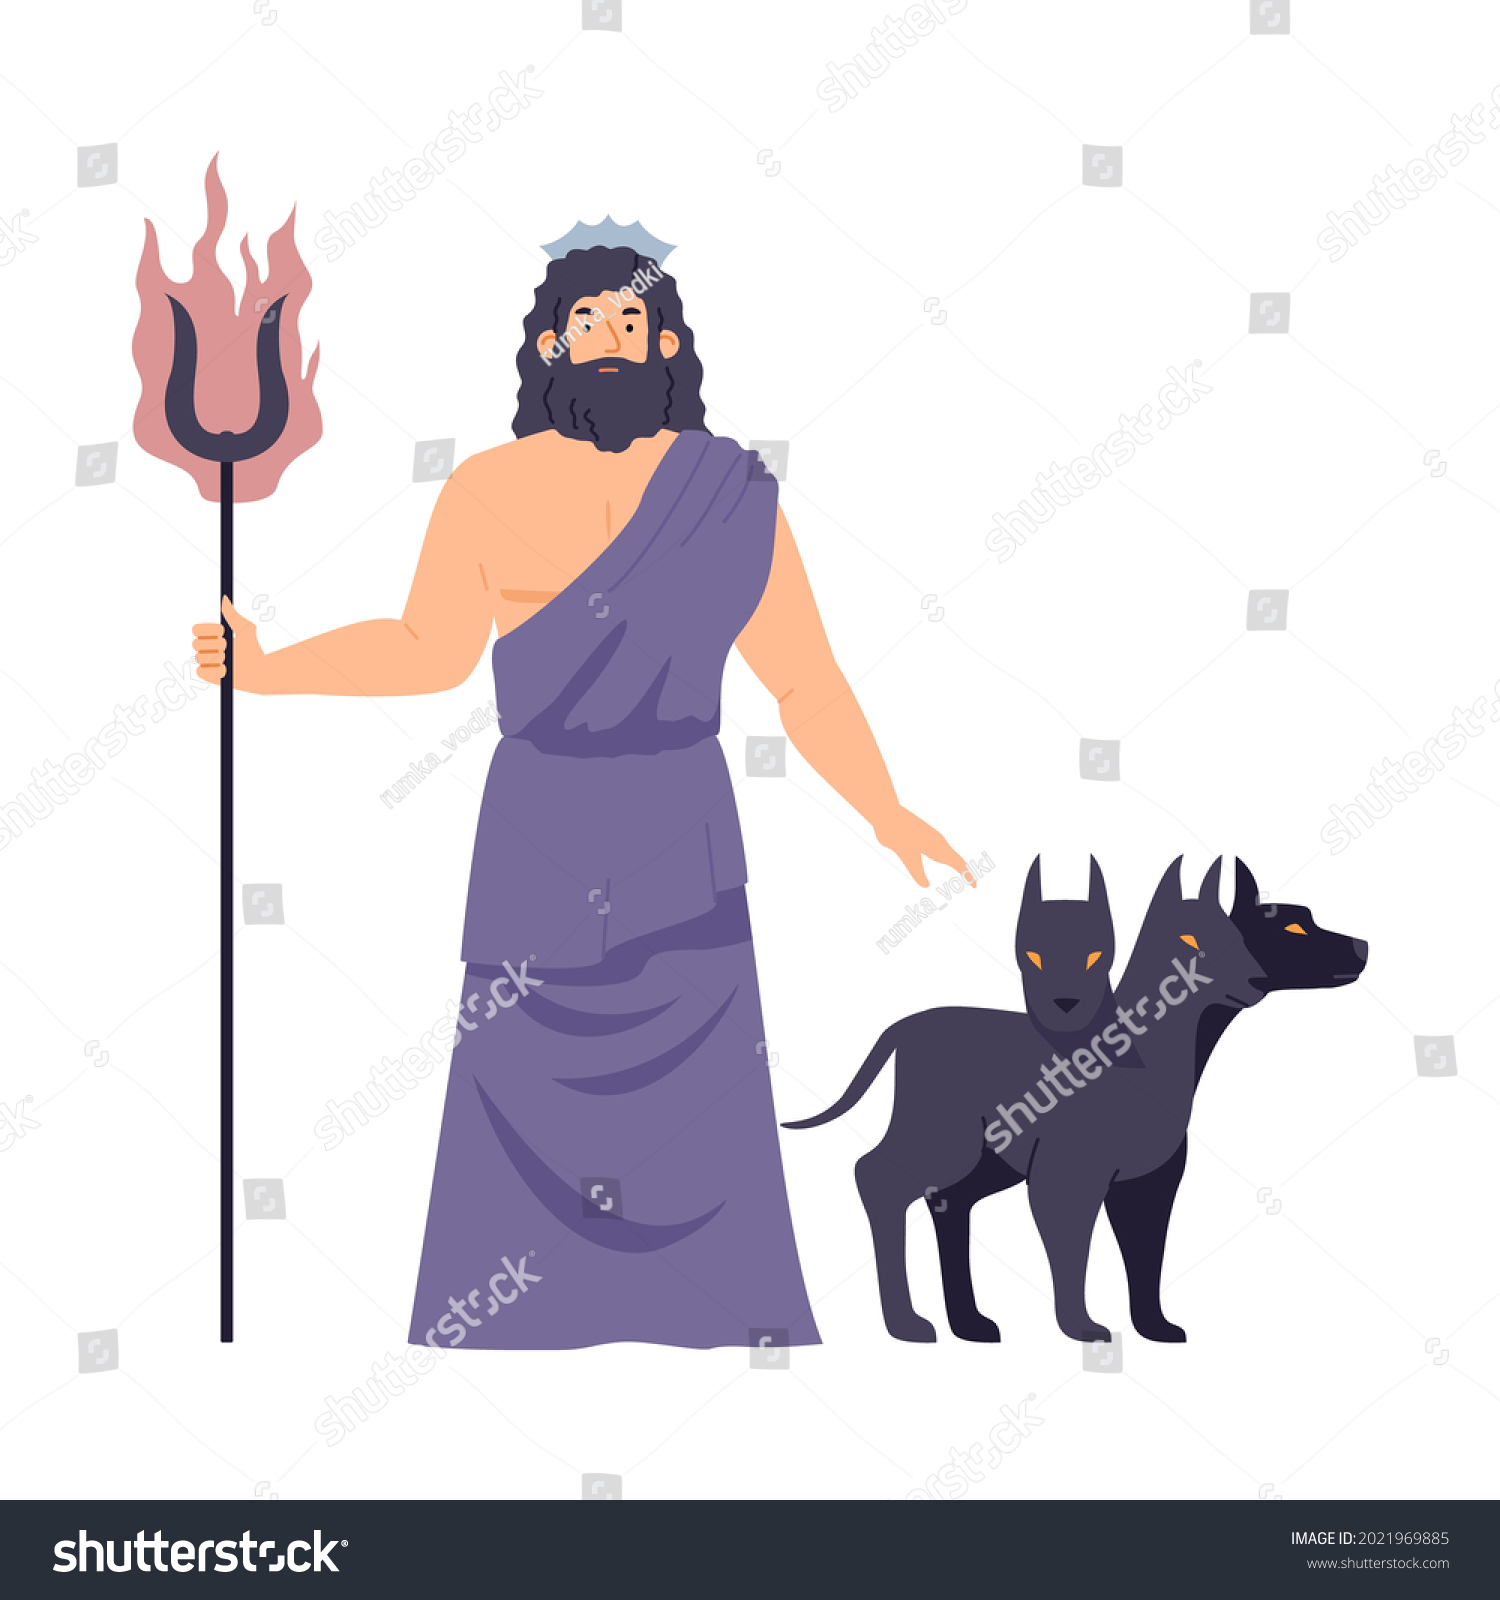 SVG of Greek god of underworld Hades or roman Pluto with Cerberus dogs, flat vector illustration isolated on white background. Hades the shadowland ruler and death god. svg